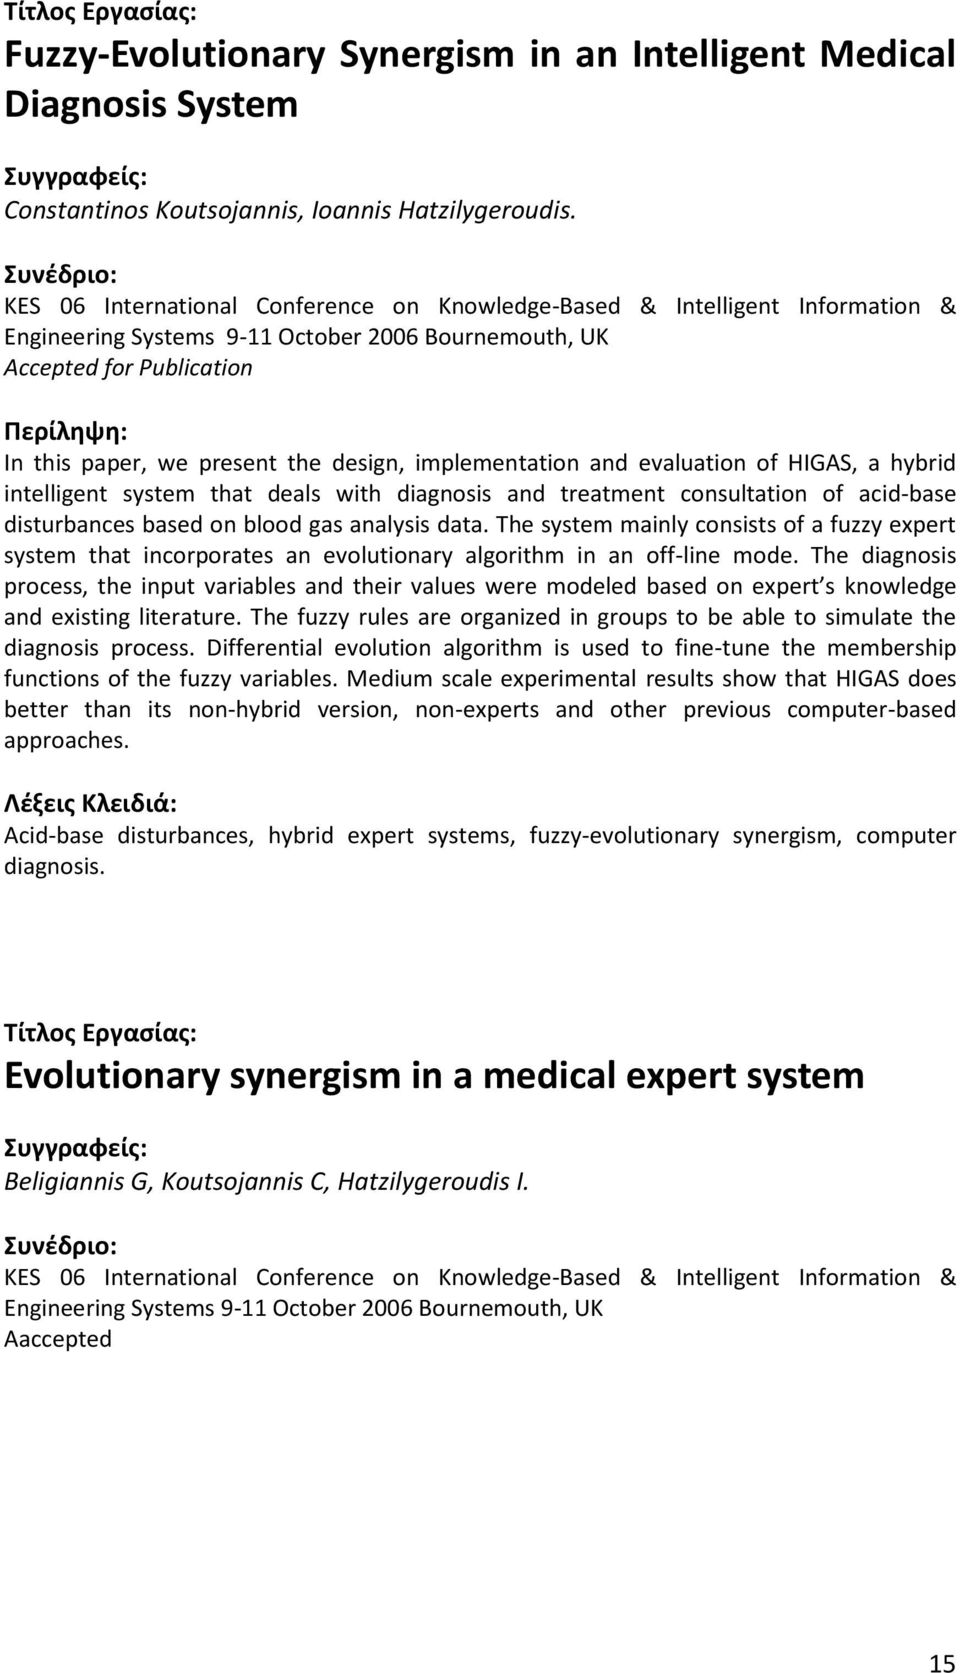 implementation and evaluation of HIGAS, a hybrid intelligent system that deals with diagnosis and treatment consultation of acid-base disturbances based on blood gas analysis data.